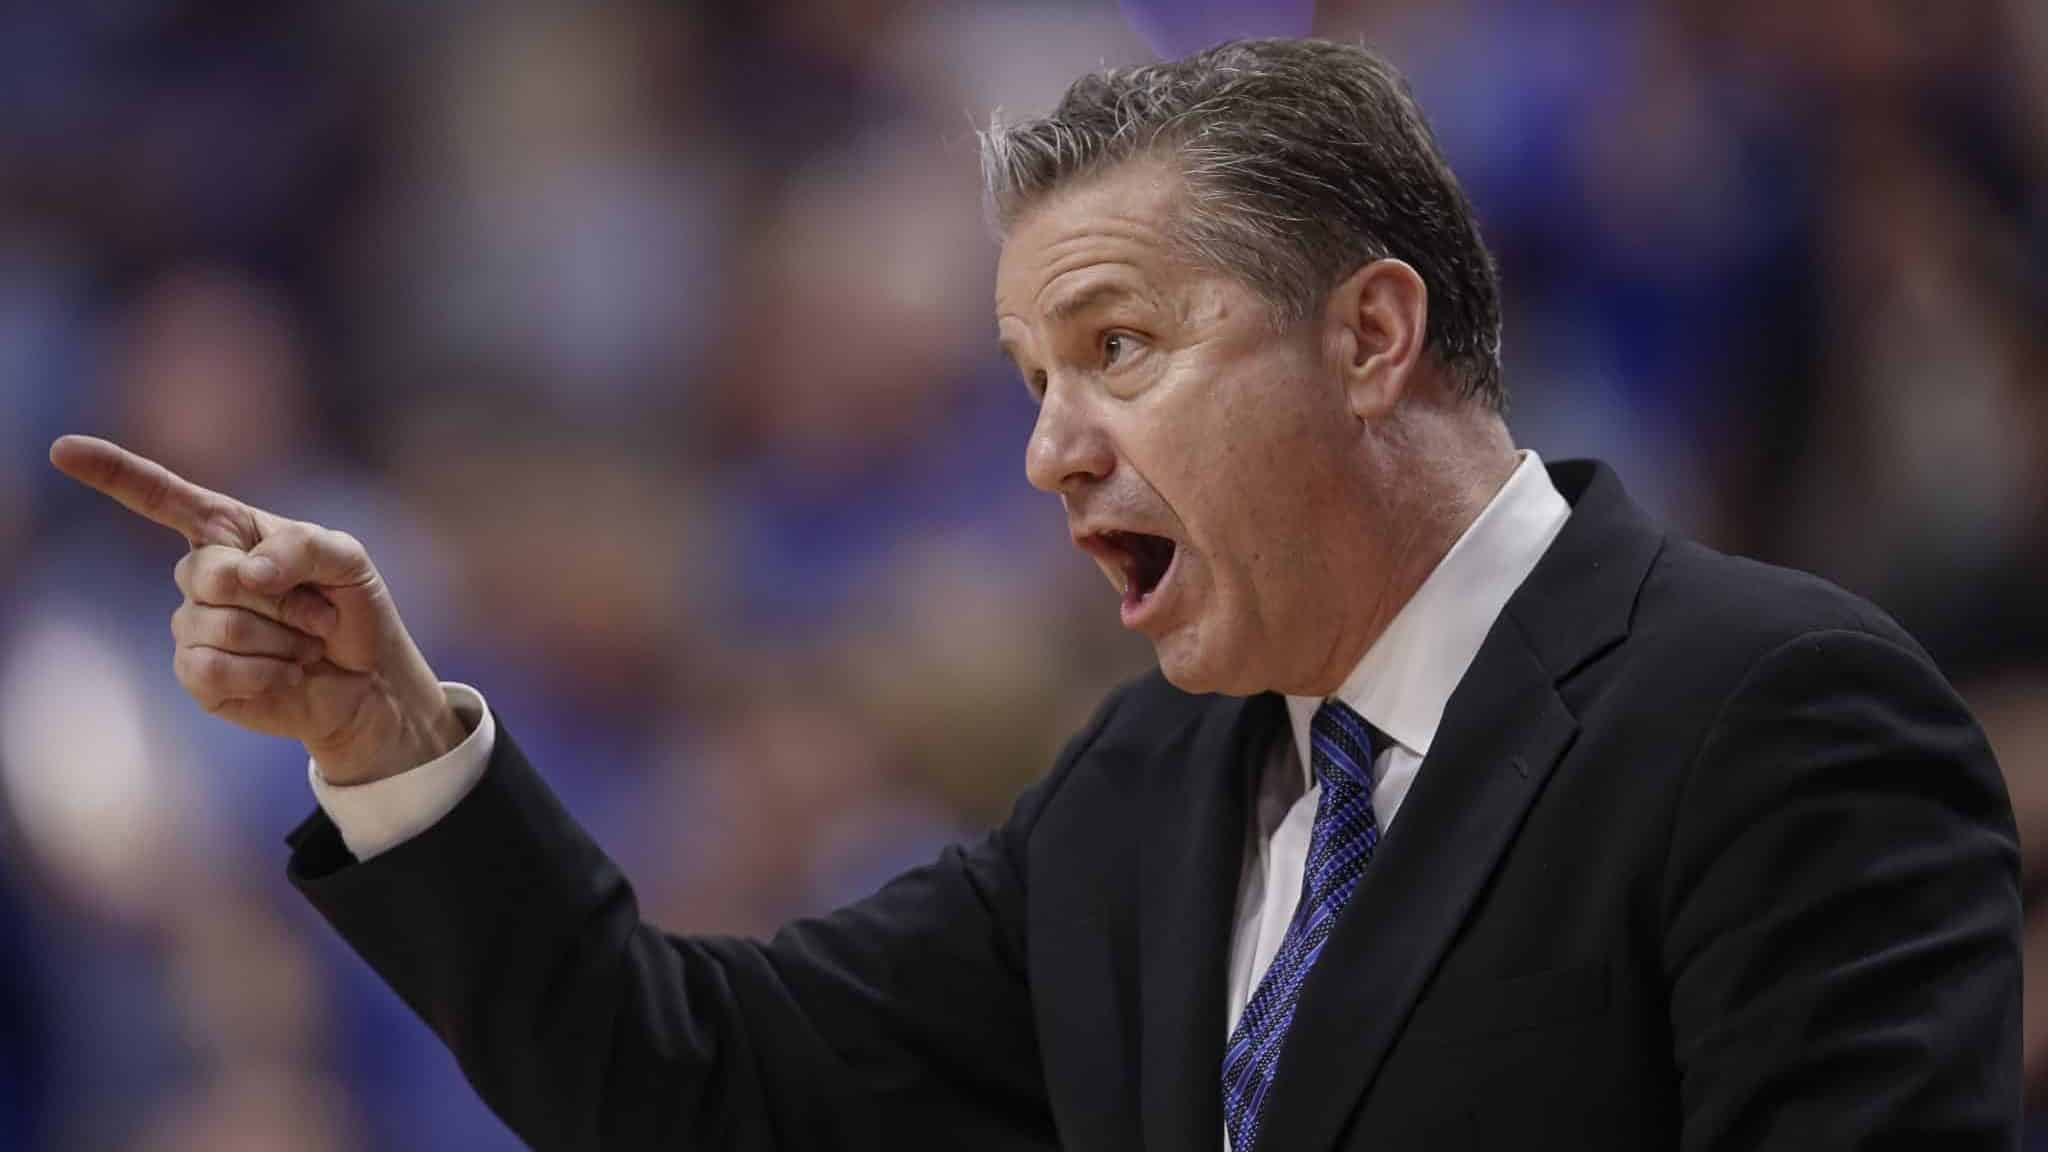 LEXINGTON, KY - FEBRUARY 04: Head coach John Calipari of the Kentucky Wildcats calls out during the second half against the Mississippi State Bulldogs at Rupp Arena on February 4, 2020 in Lexington, Kentucky.